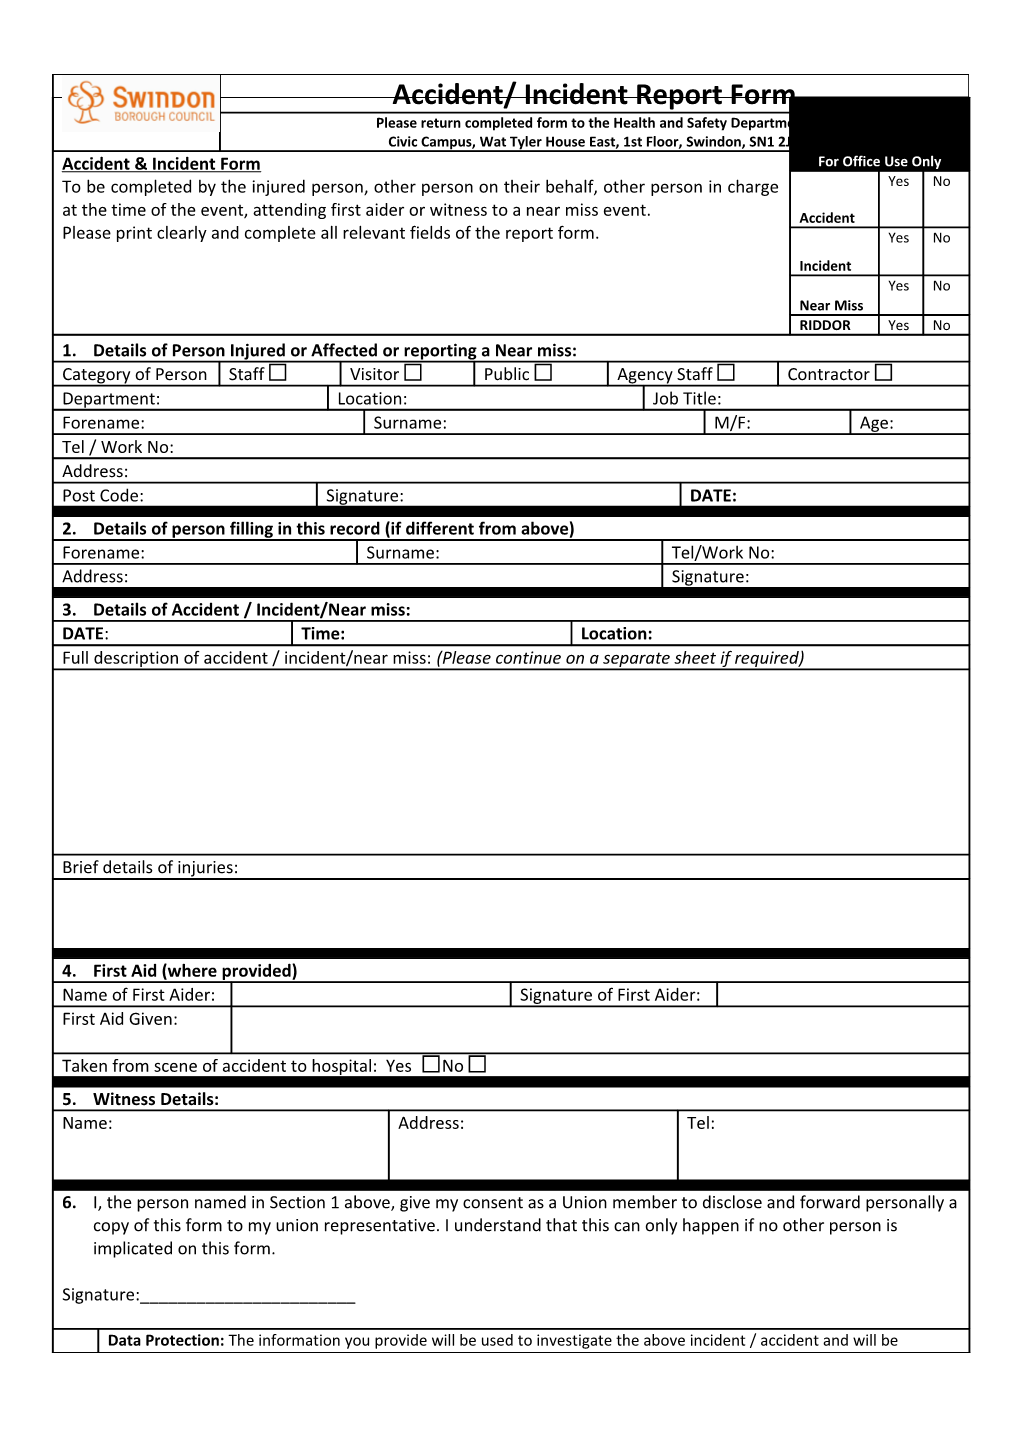 Accident and Incident Form